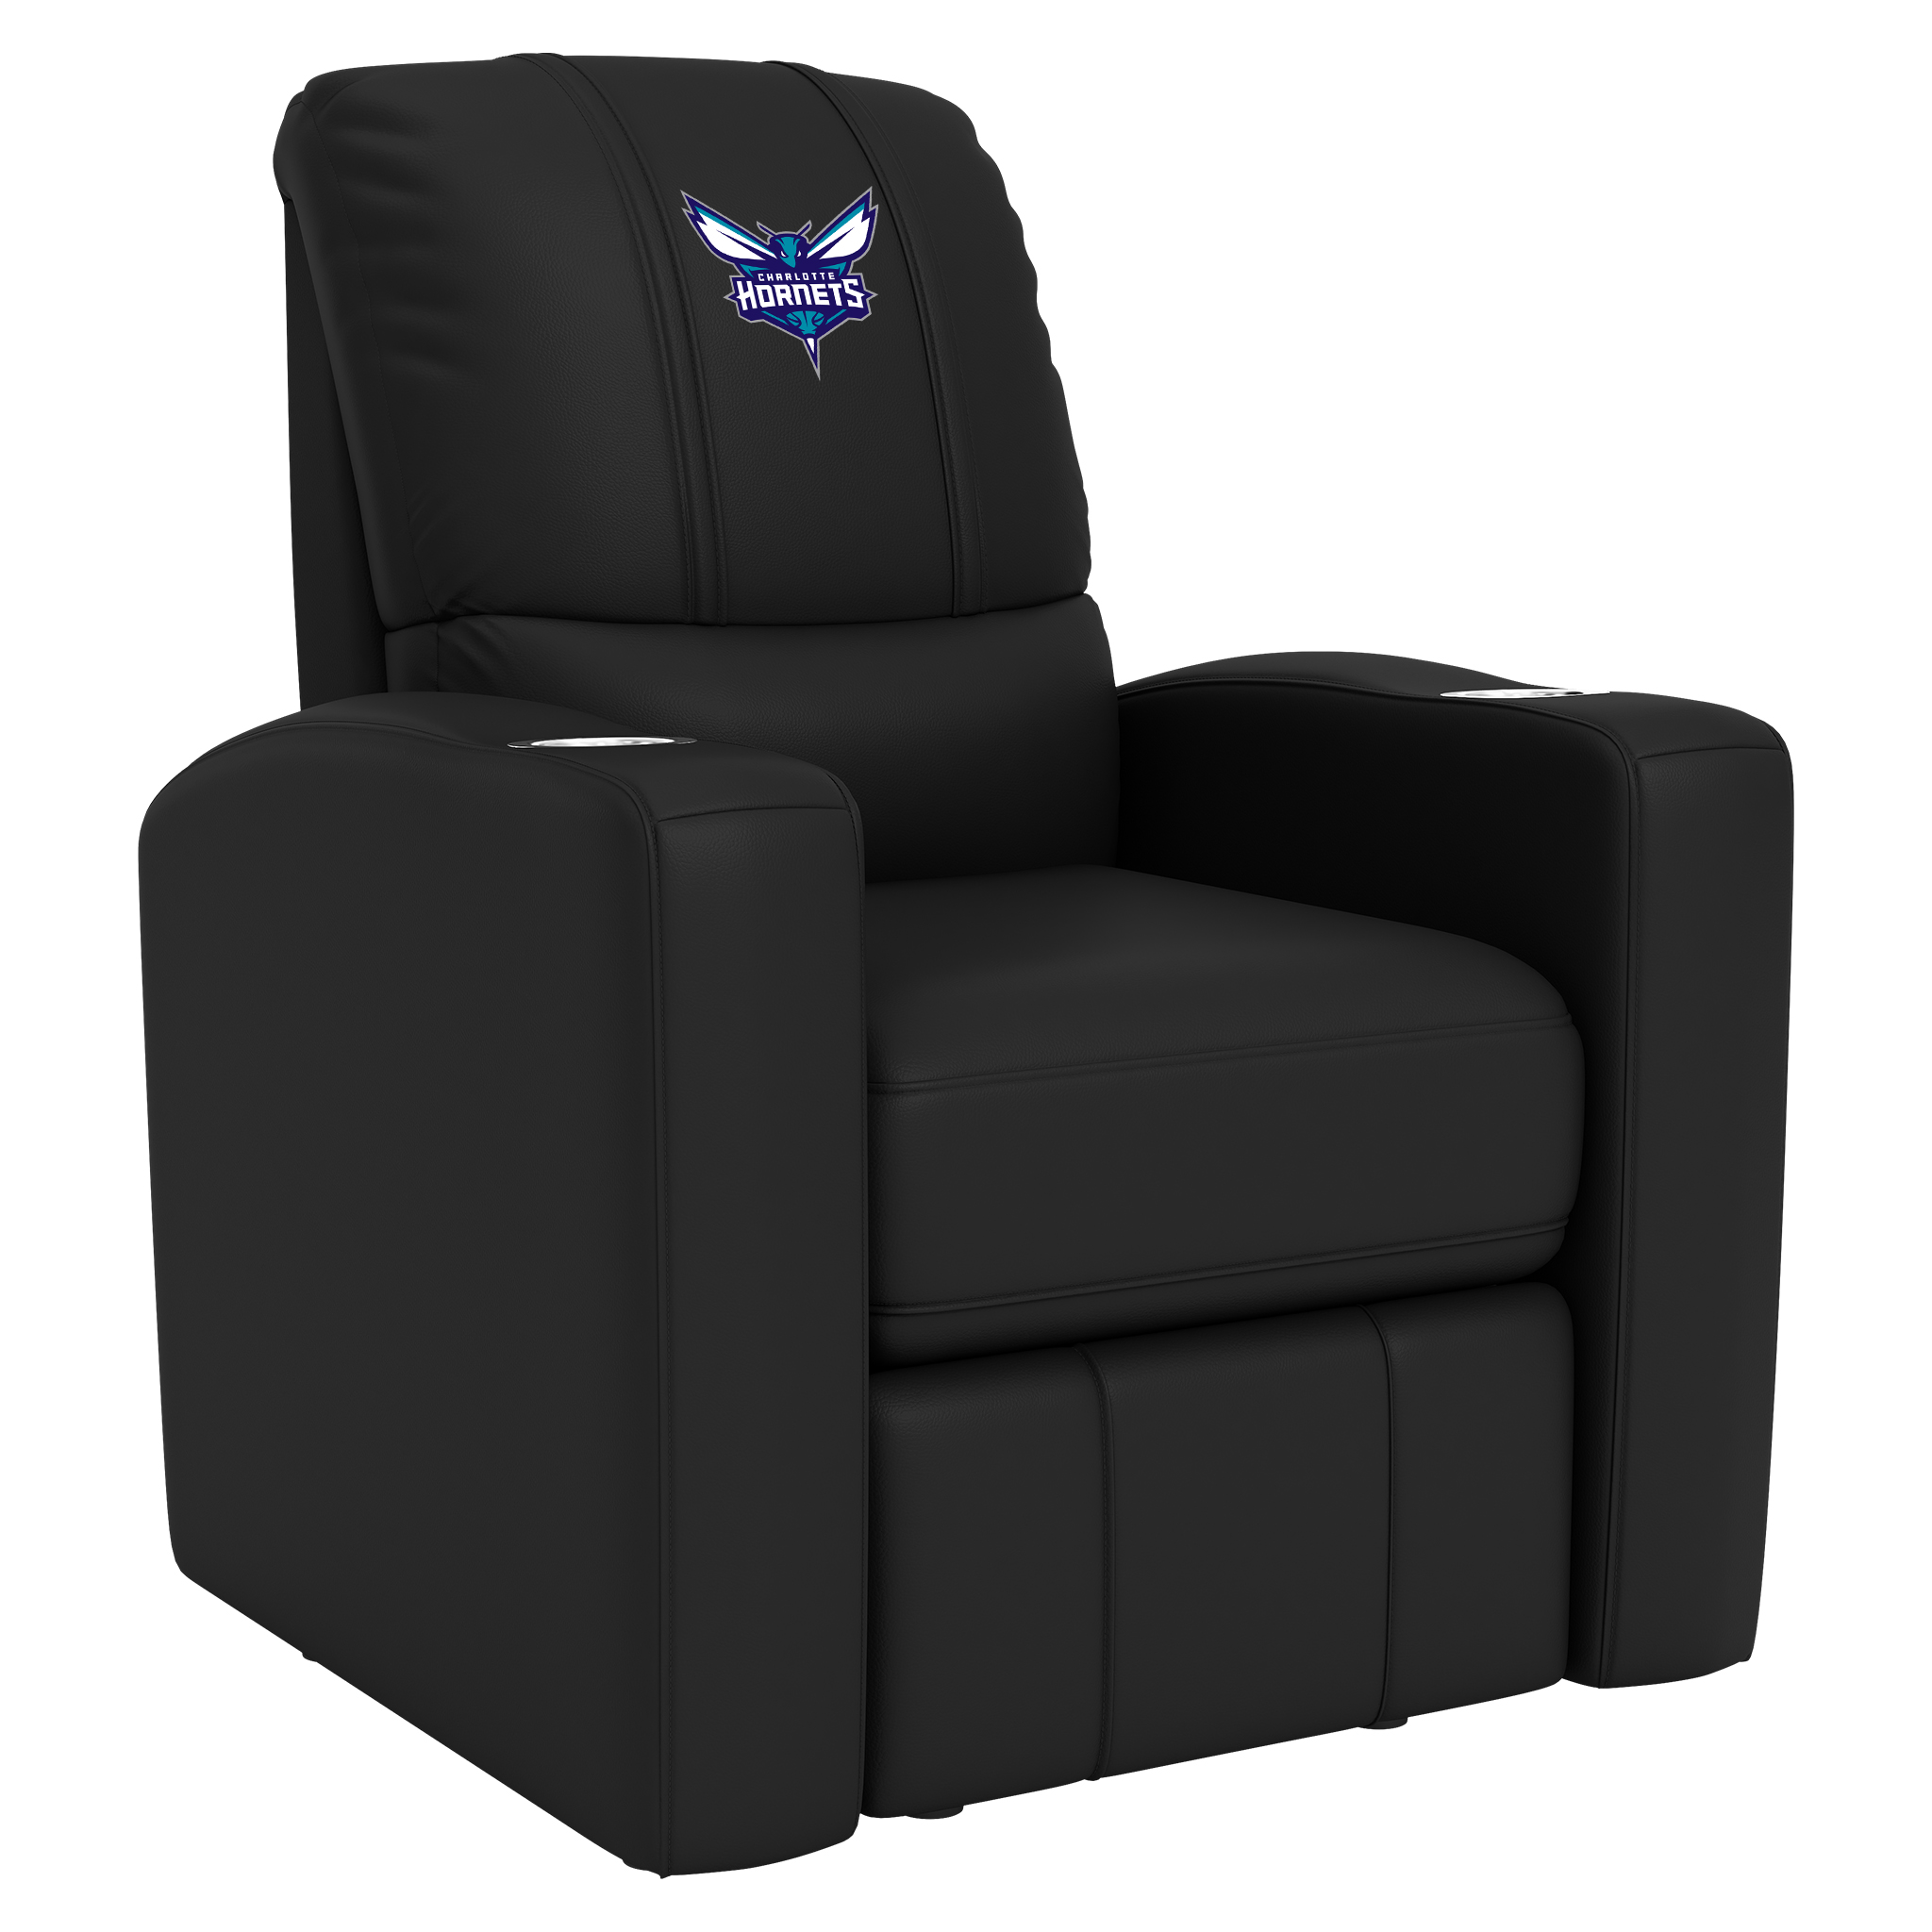 Charlotte Hornets Stealth Recliner with Charlotte Hornets Primary